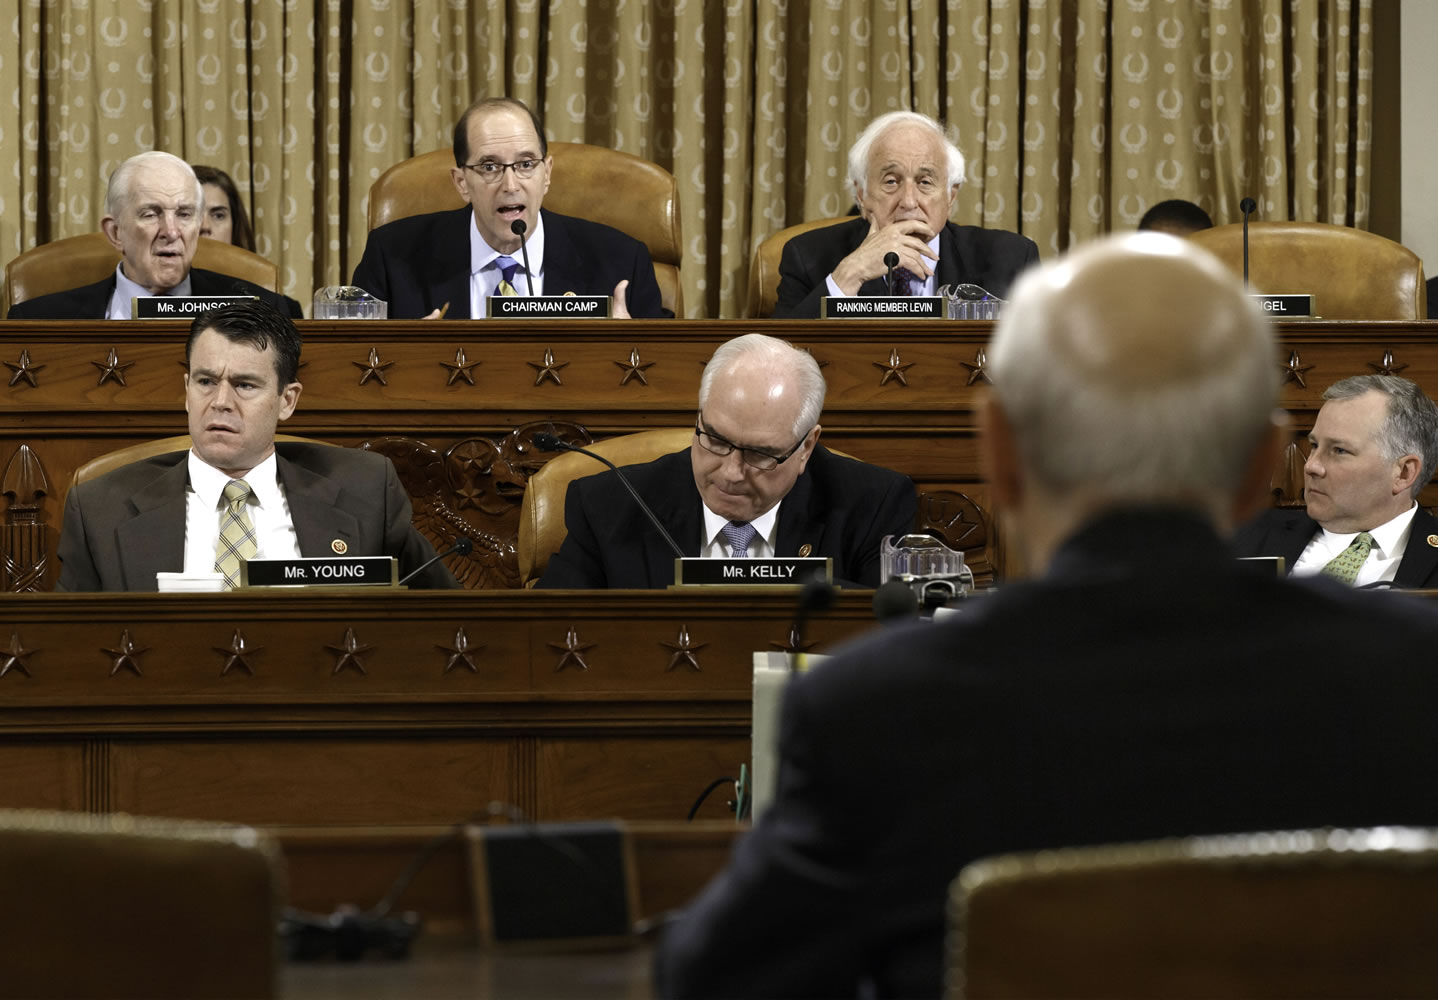 House Ways and Means Committee Chairman Rep. Dave Camp , R-Mich., center, flanked by the committee's ranking member Rep. Sander Levin, D-Mich., right, and Rep.